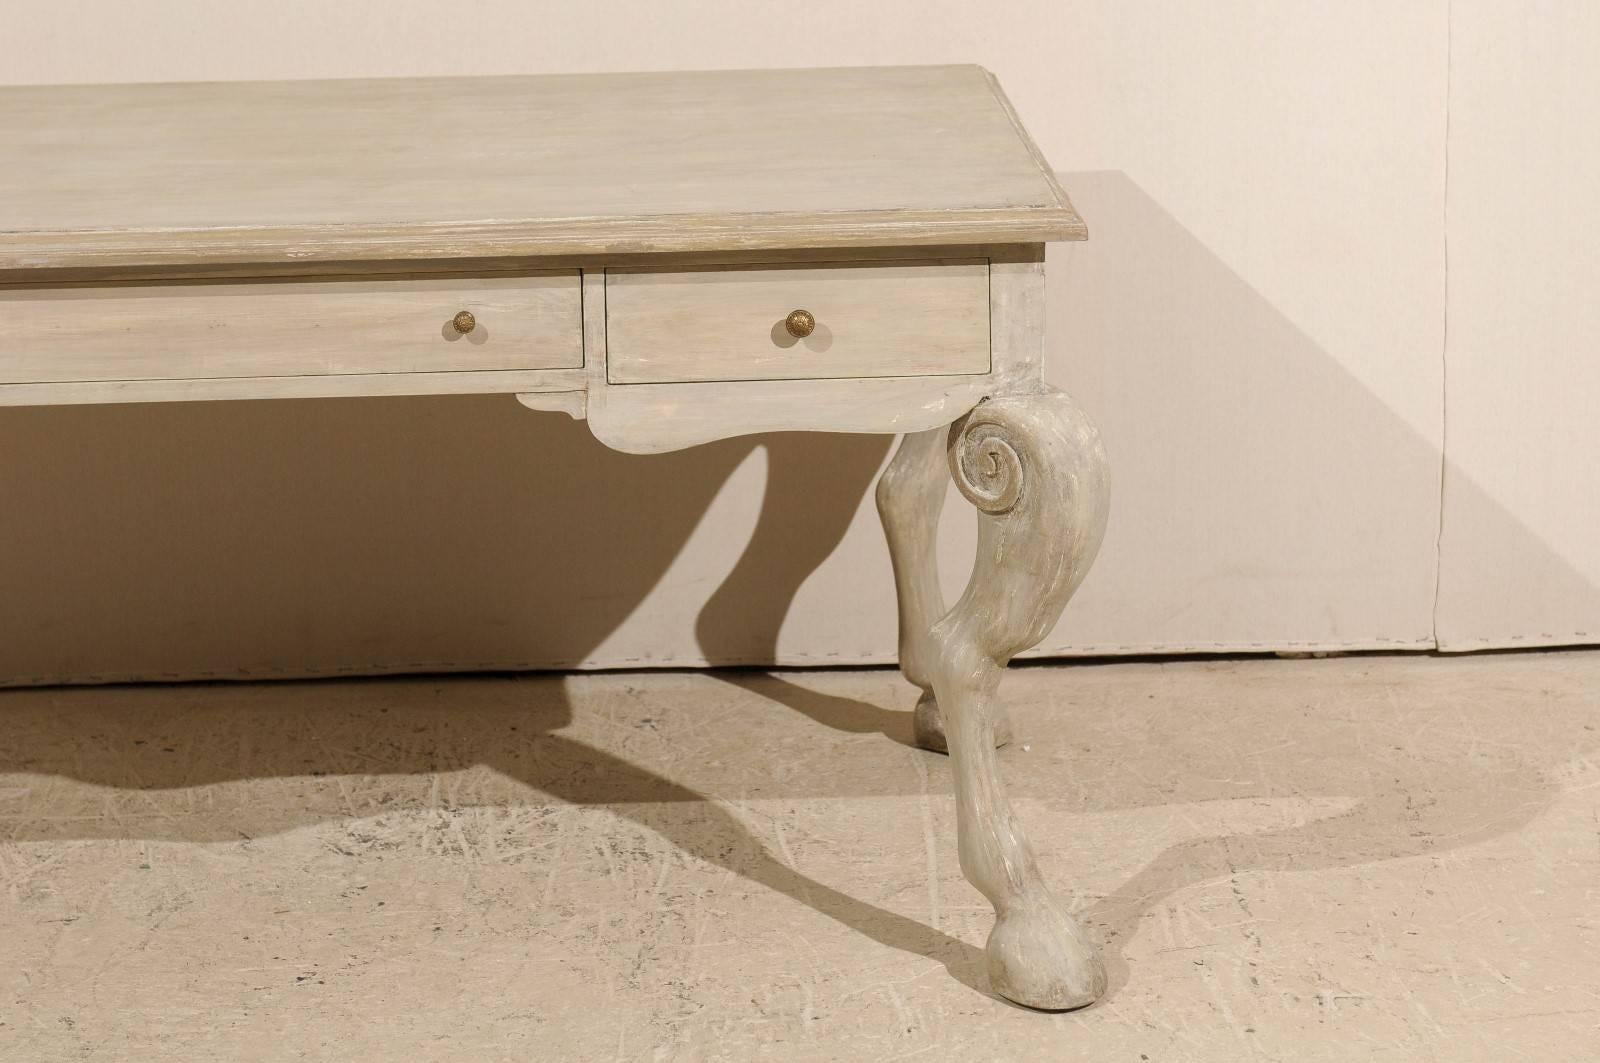 American Unique Painted Wood Desk with Animal Legs and Hooved Feet of Grey-Green Color